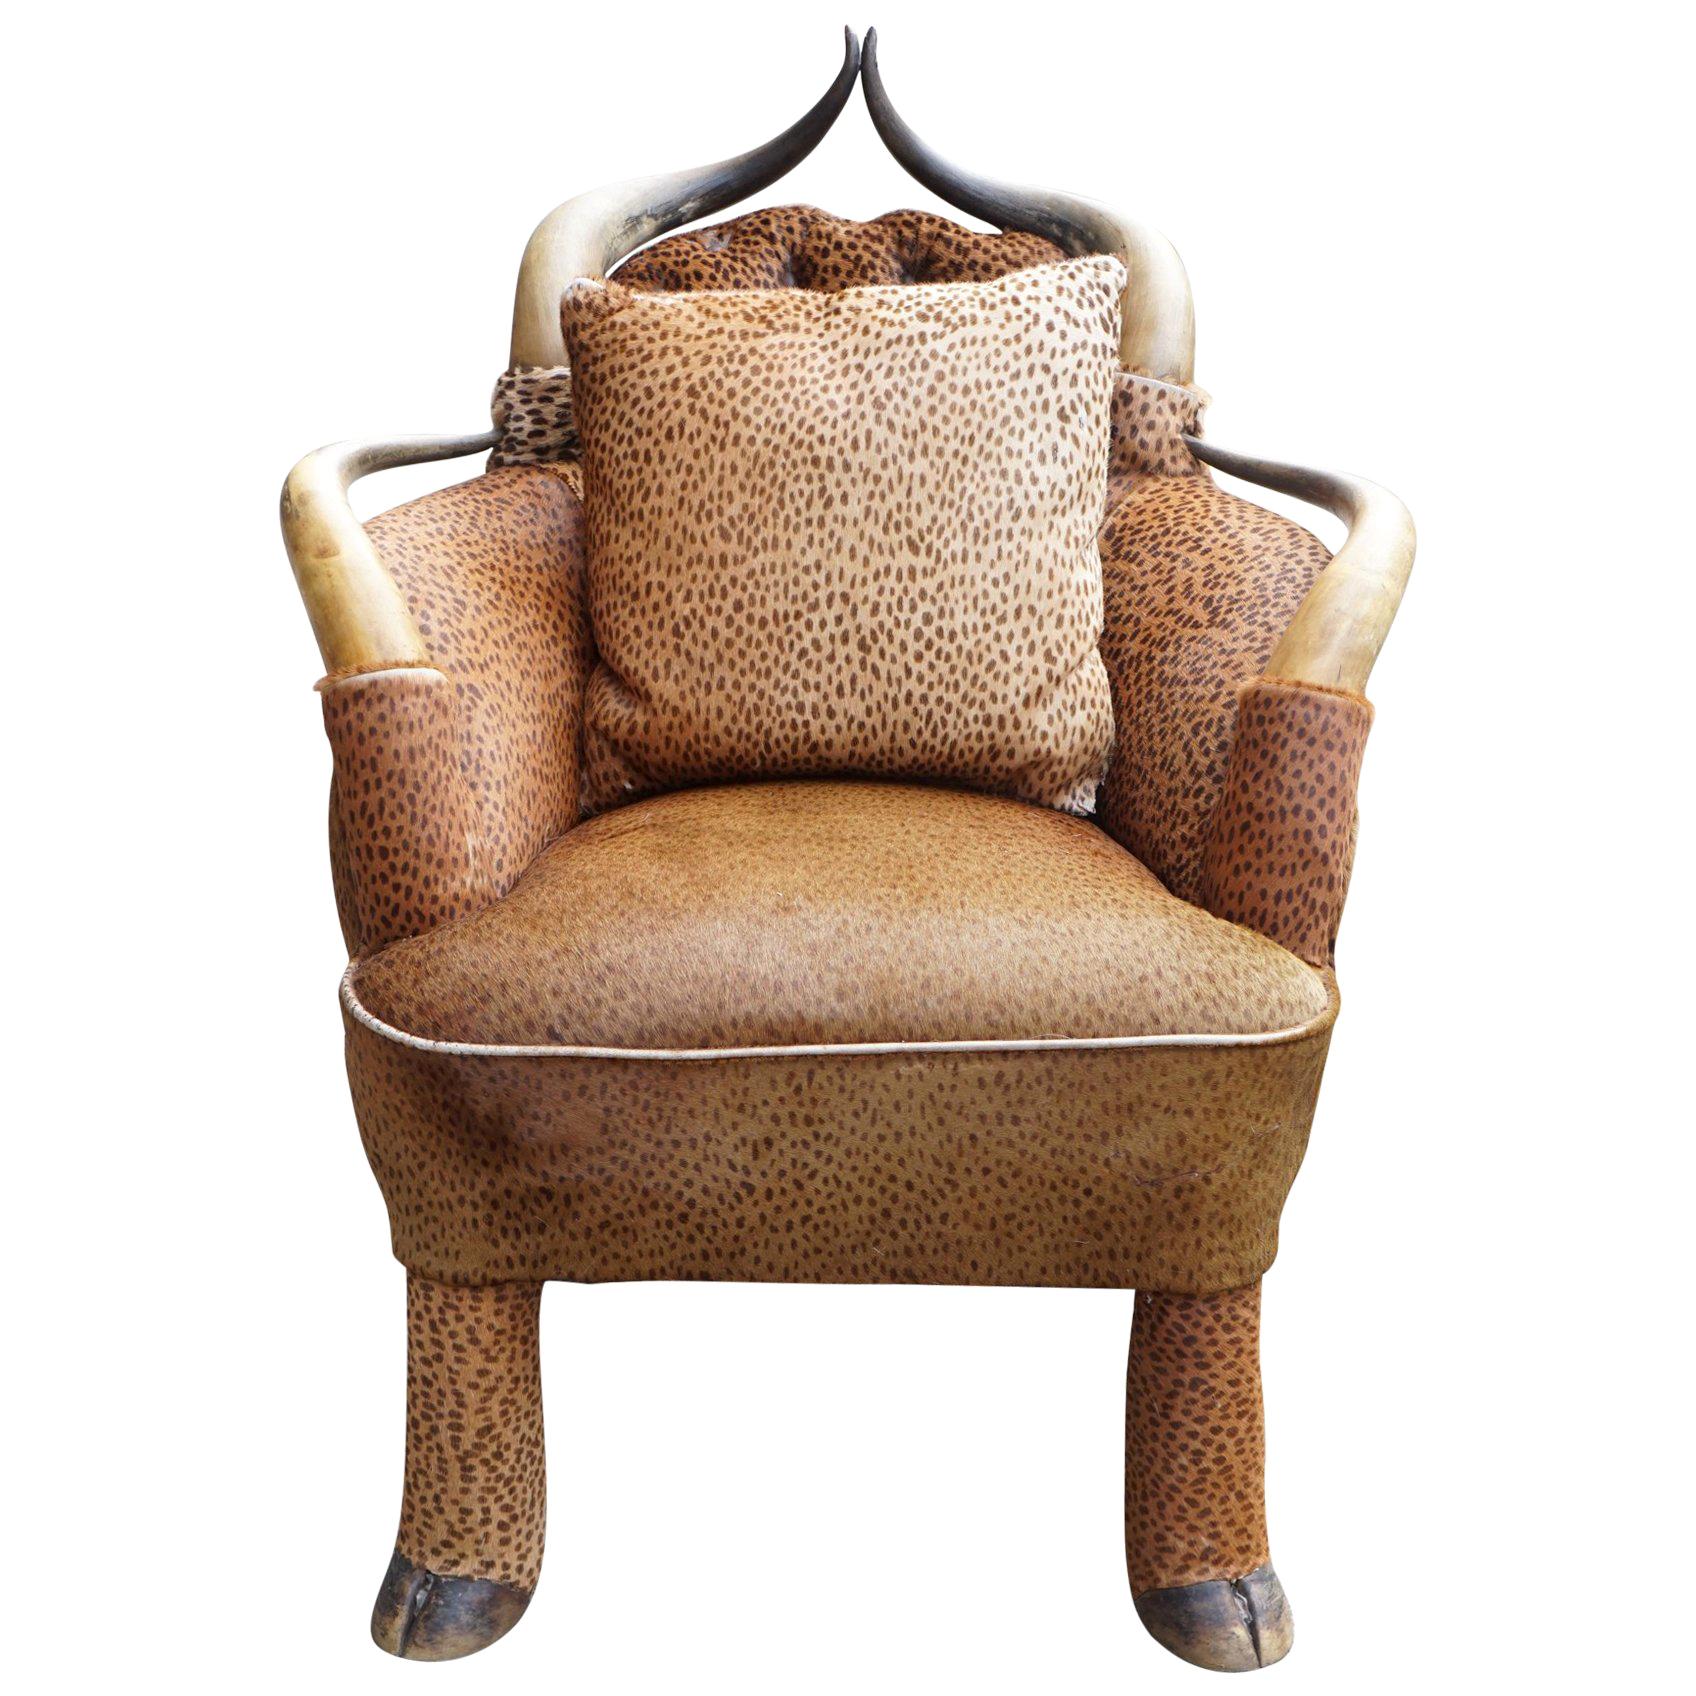 Period Horn and Hoof Hide Upholstered Chair